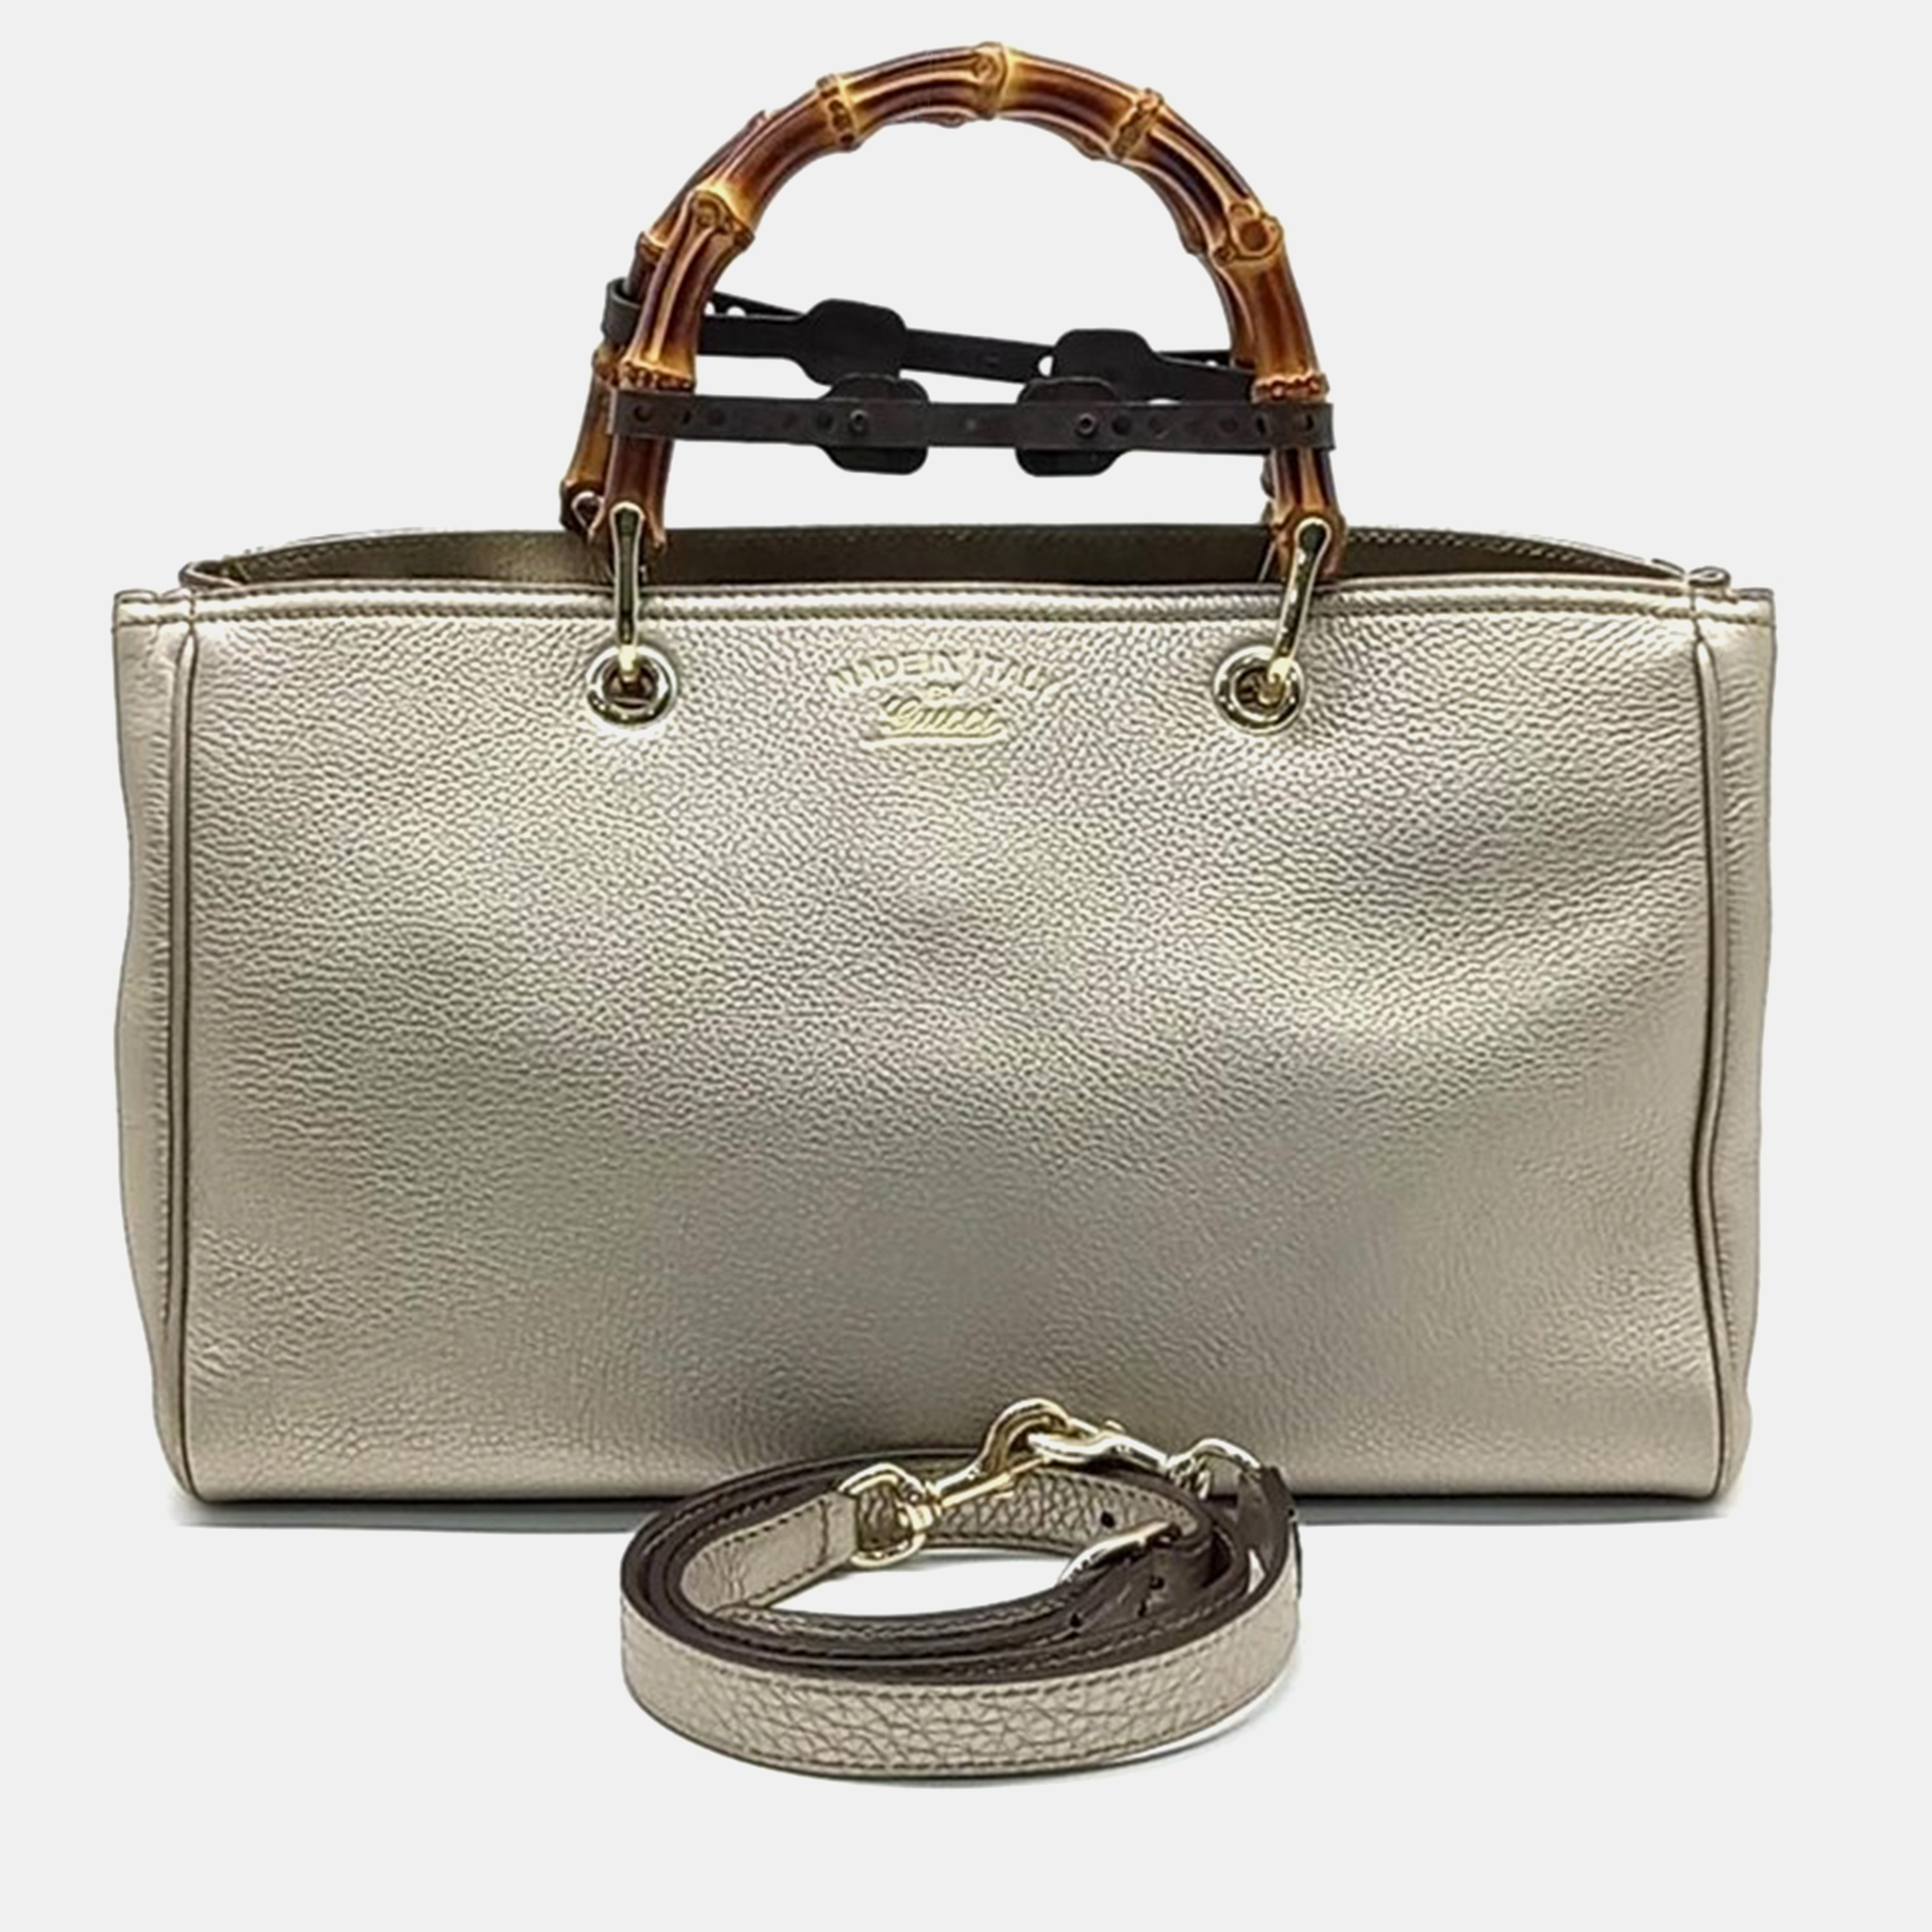 

Gucci Bamboo Tote and Shoulder Bag, Beige